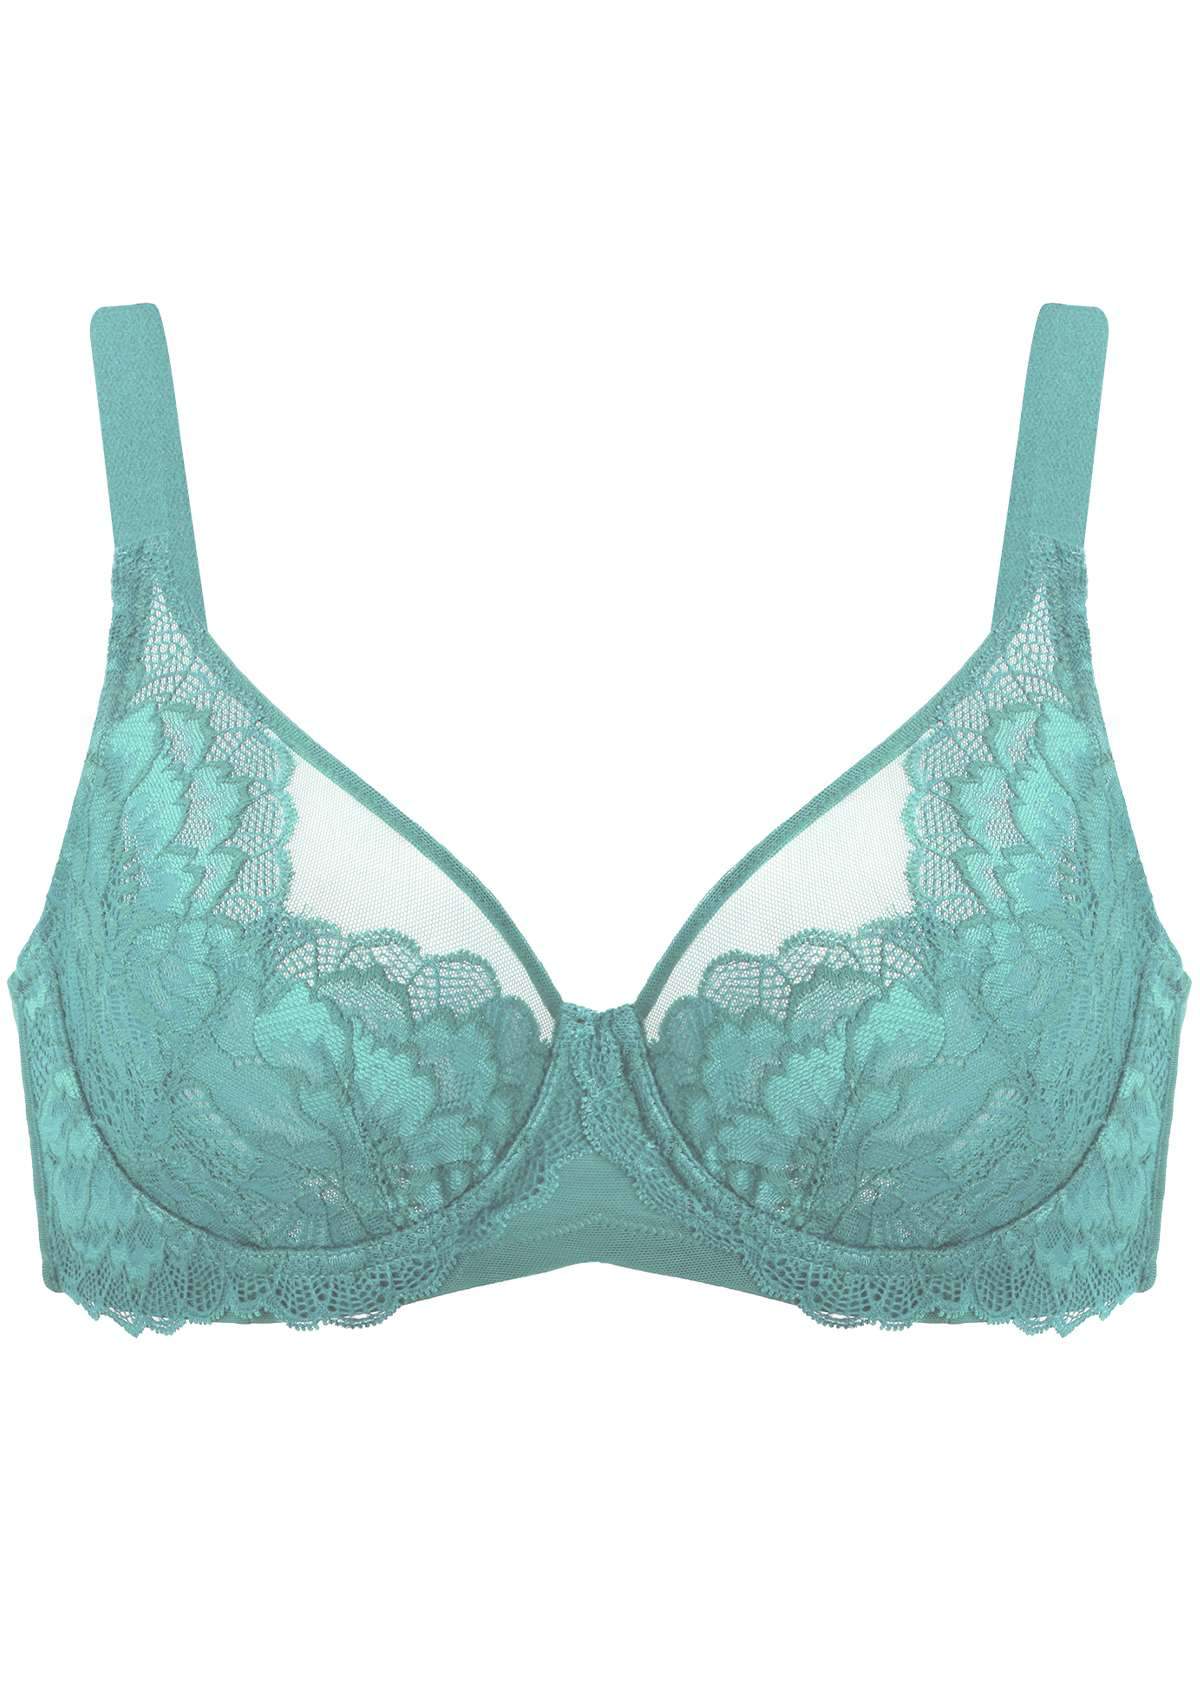 HSIA Peony Lace Unlined Supportive Underwire Bra - Light Coral / 38 / DDD/F